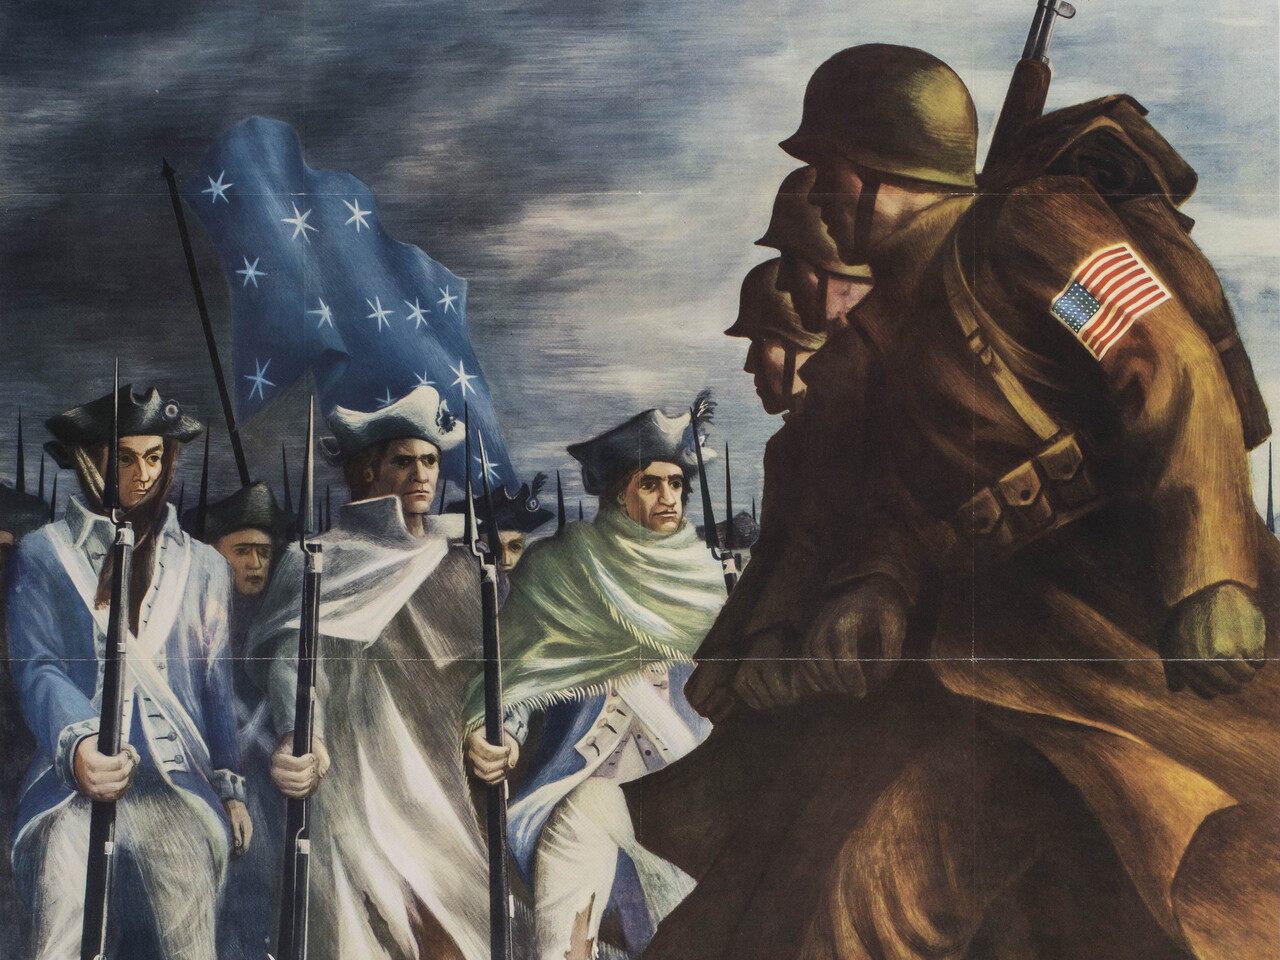 WWII poster showing 1943 troops passing Revolutionary era soldiers